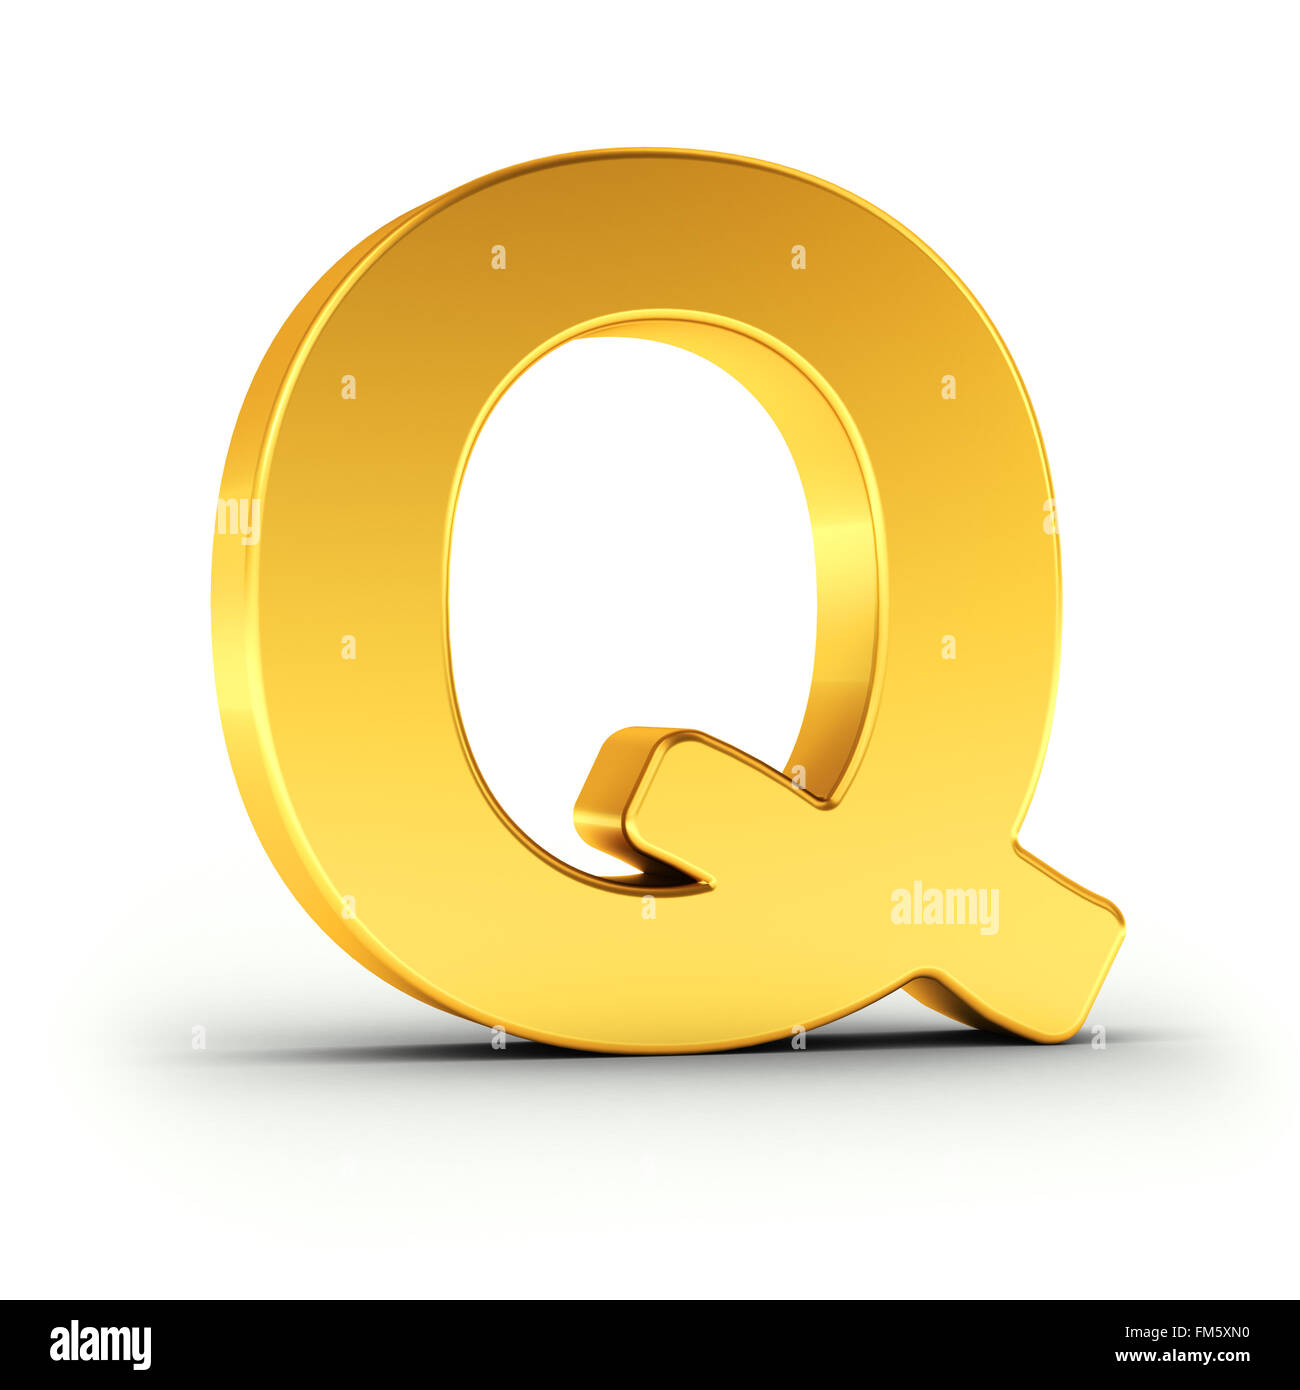 The Letter Q as a polished golden object over white background with clipping path for quick and accurate isolation. Stock Photo